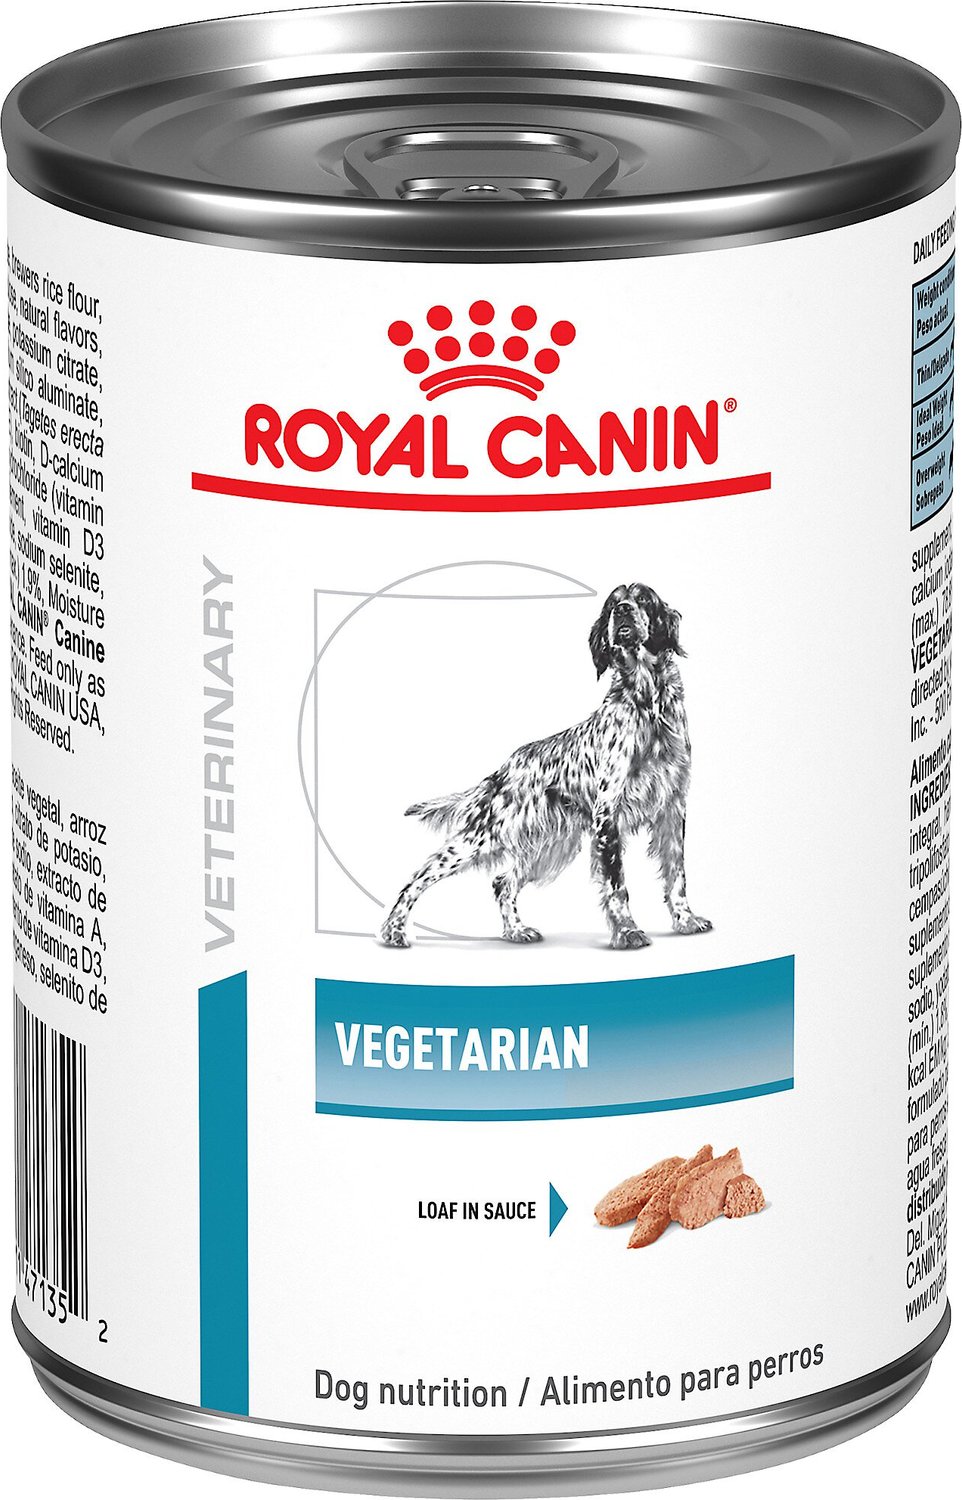 Royal Canin Veterinary Diet Vegetarian Canned Dog Food, 13